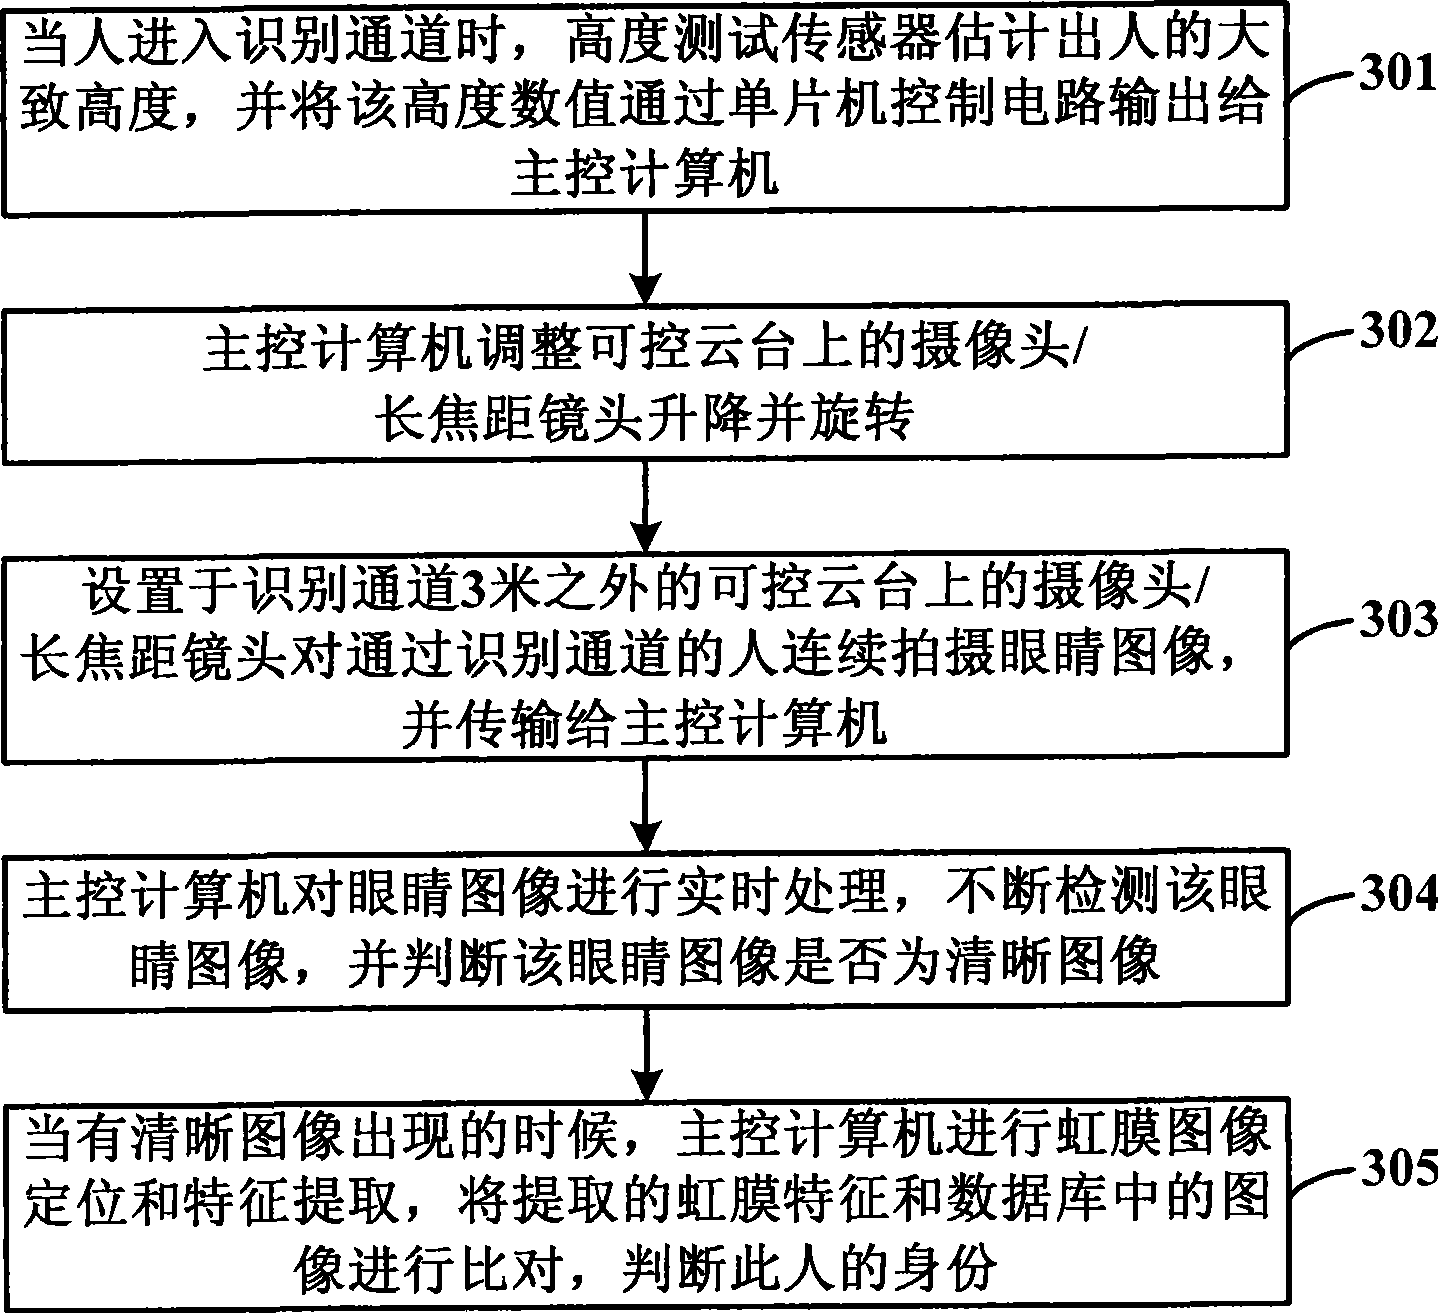 Distant range iris recognition system and method